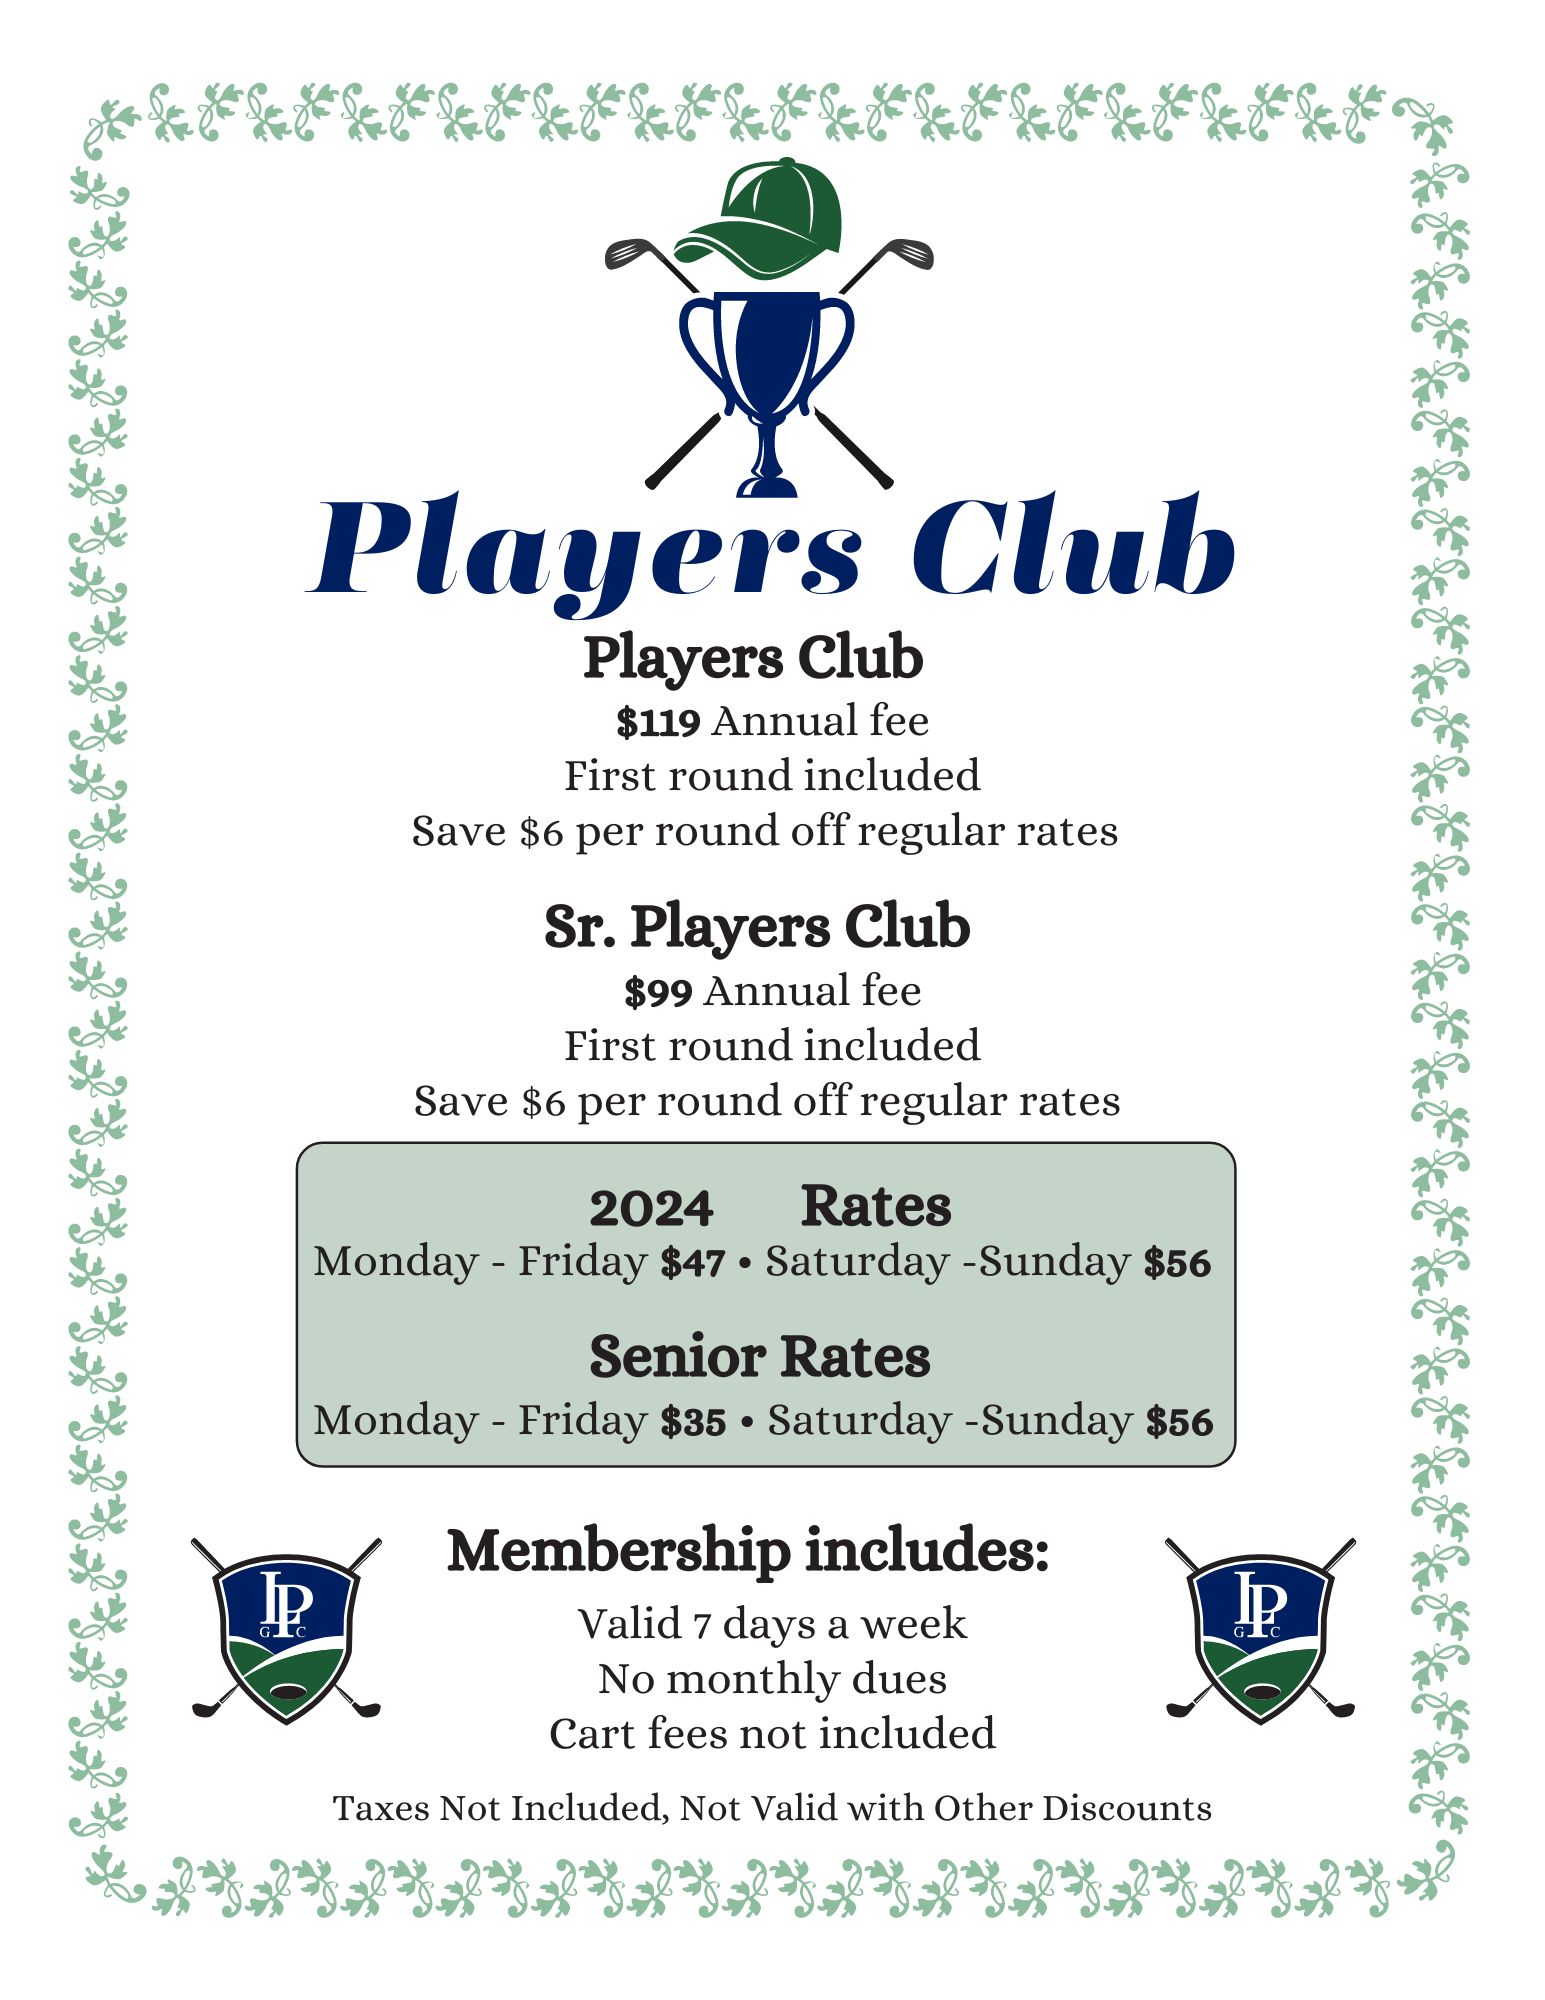 Players Club Offer for 2024 Season